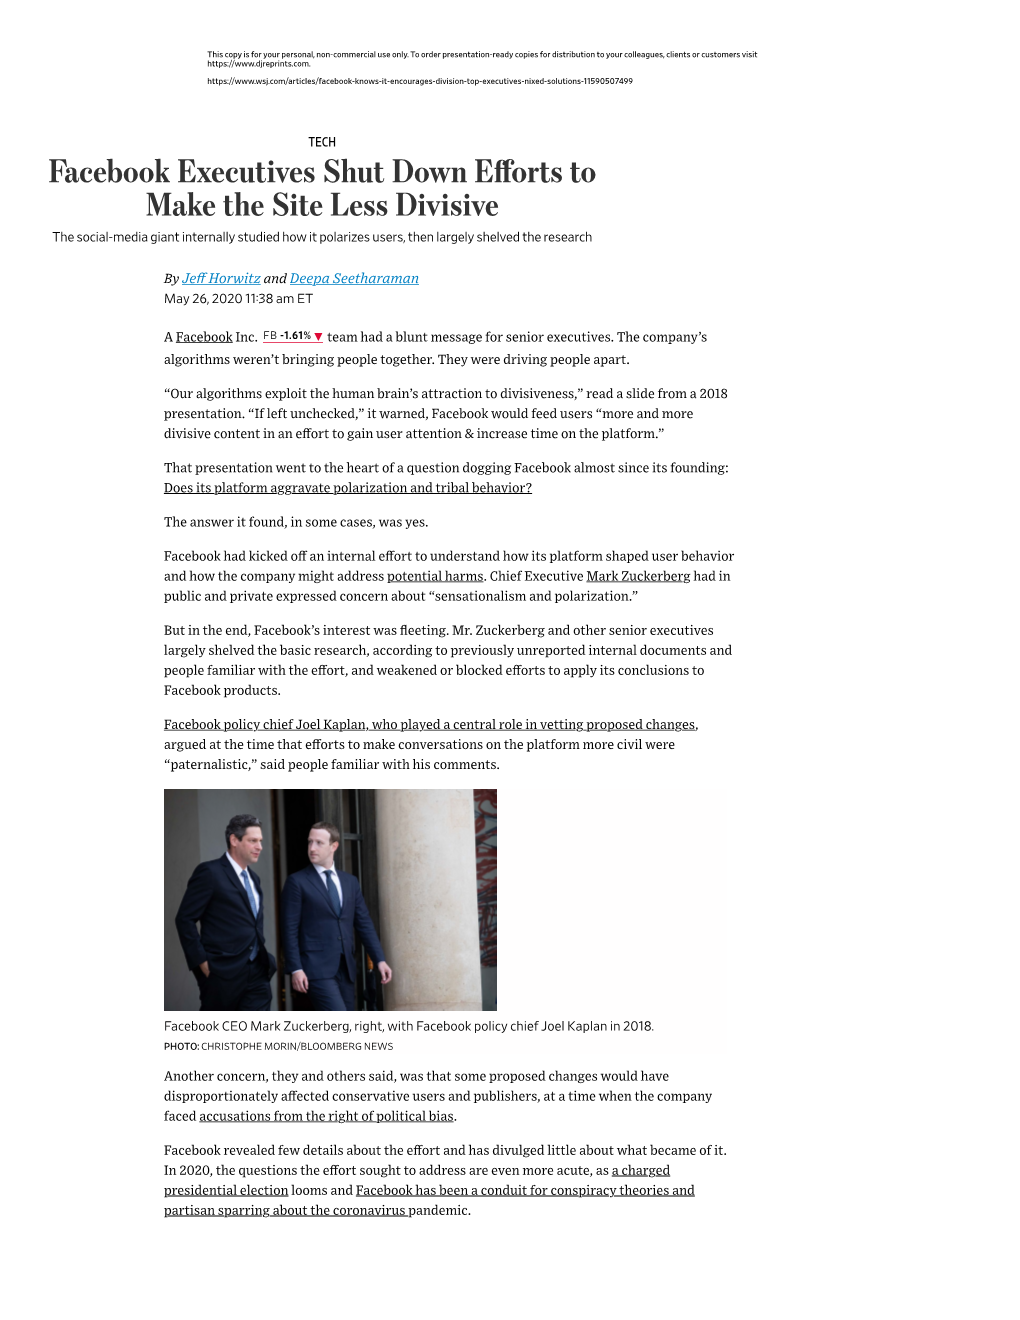 Facebook Executives Shut Down Efforts to Make the Site Less Divisive